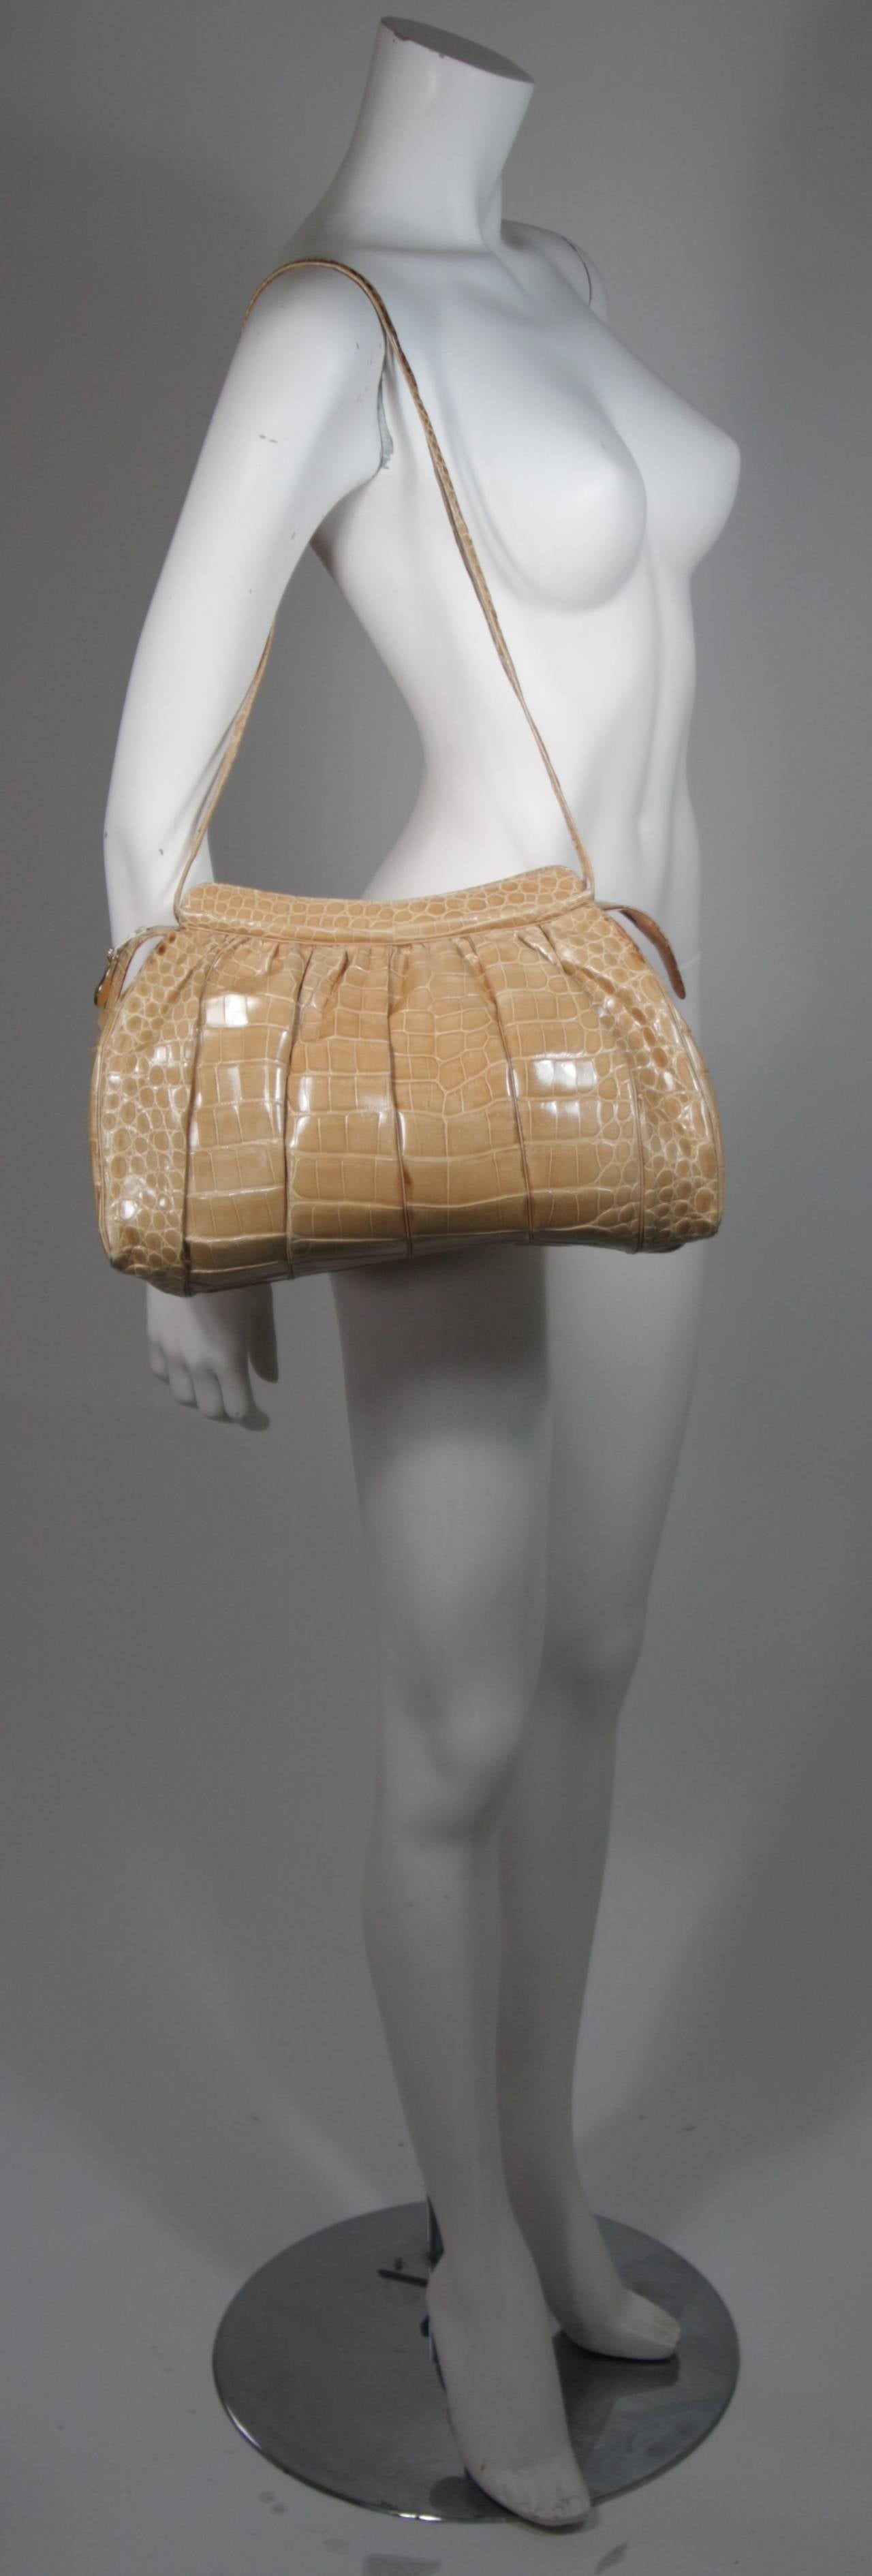 This vintage Judith Leiber is available for viewing at our Beverly Hills Boutique. We offer a large selection of evening gowns and luxury garments.

This handbag is composed of a butter cream hued Alligator. There are two straps and the bag